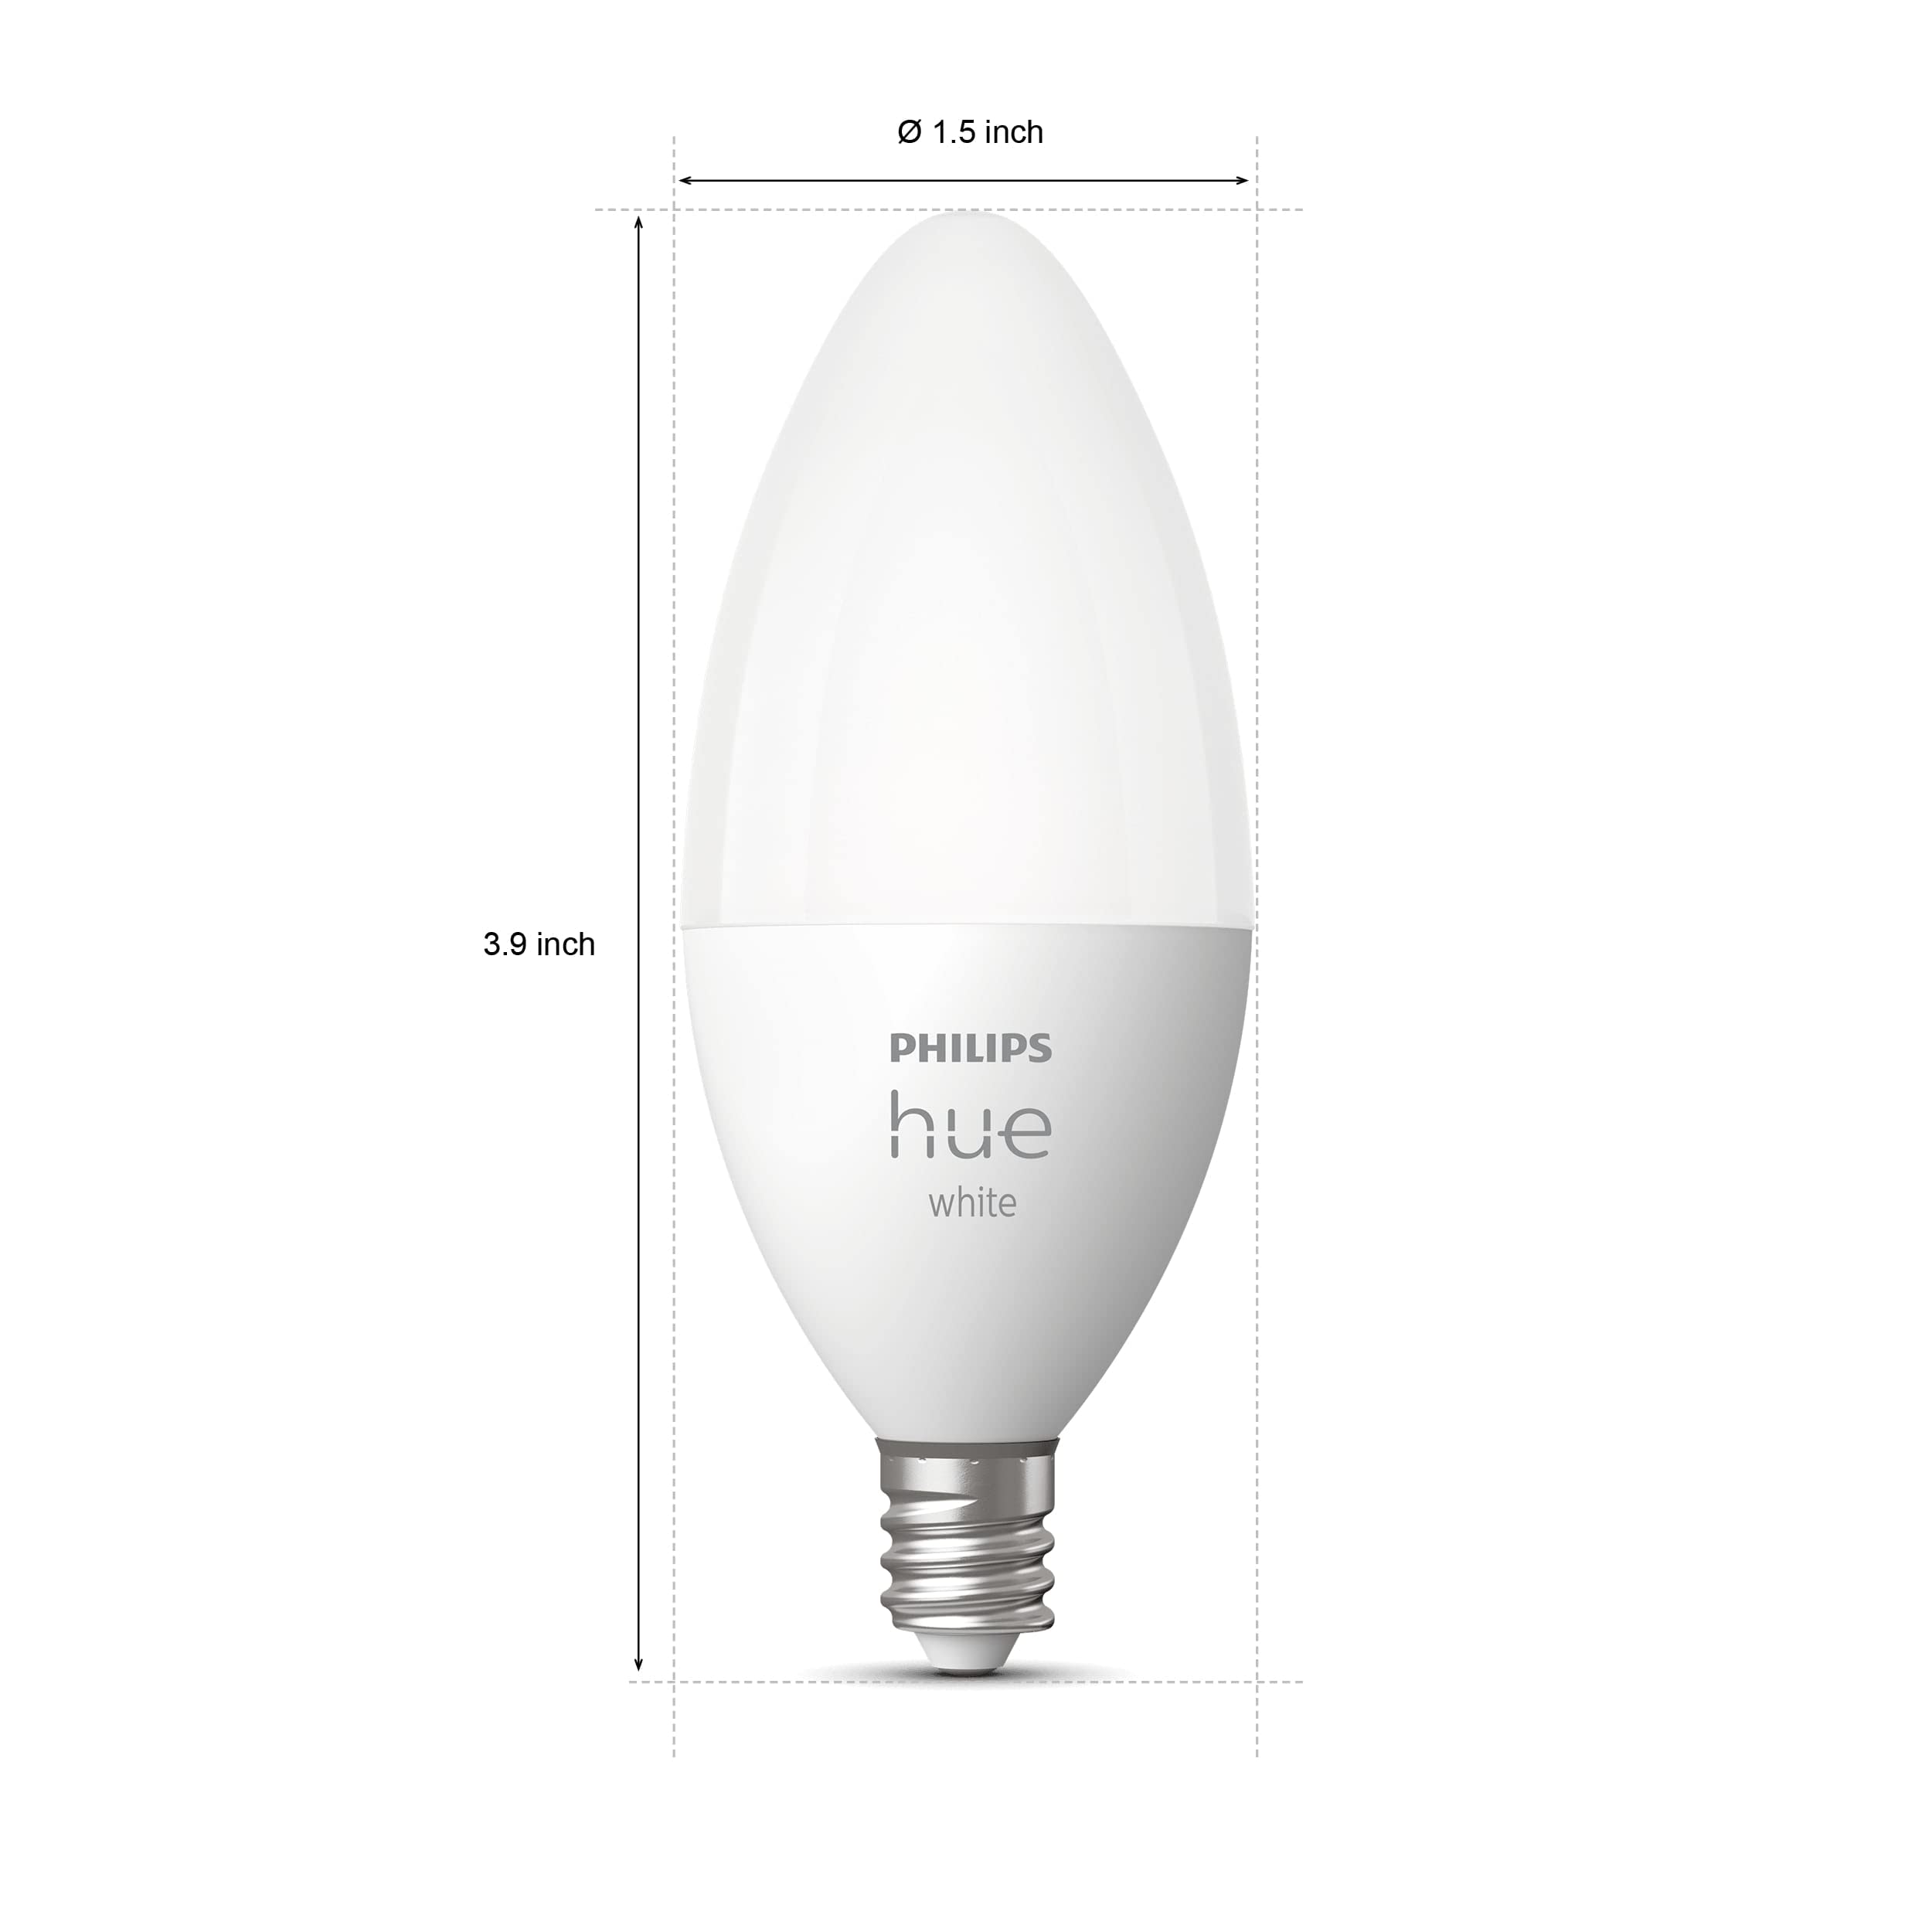 Philips Hue White LED Smart Candle, Bluetooth & Zigbee Compatible (Hue Hub Optional), Works with Alexa & Google Assistant – A Certified for Humans Device, 2 Bulbs